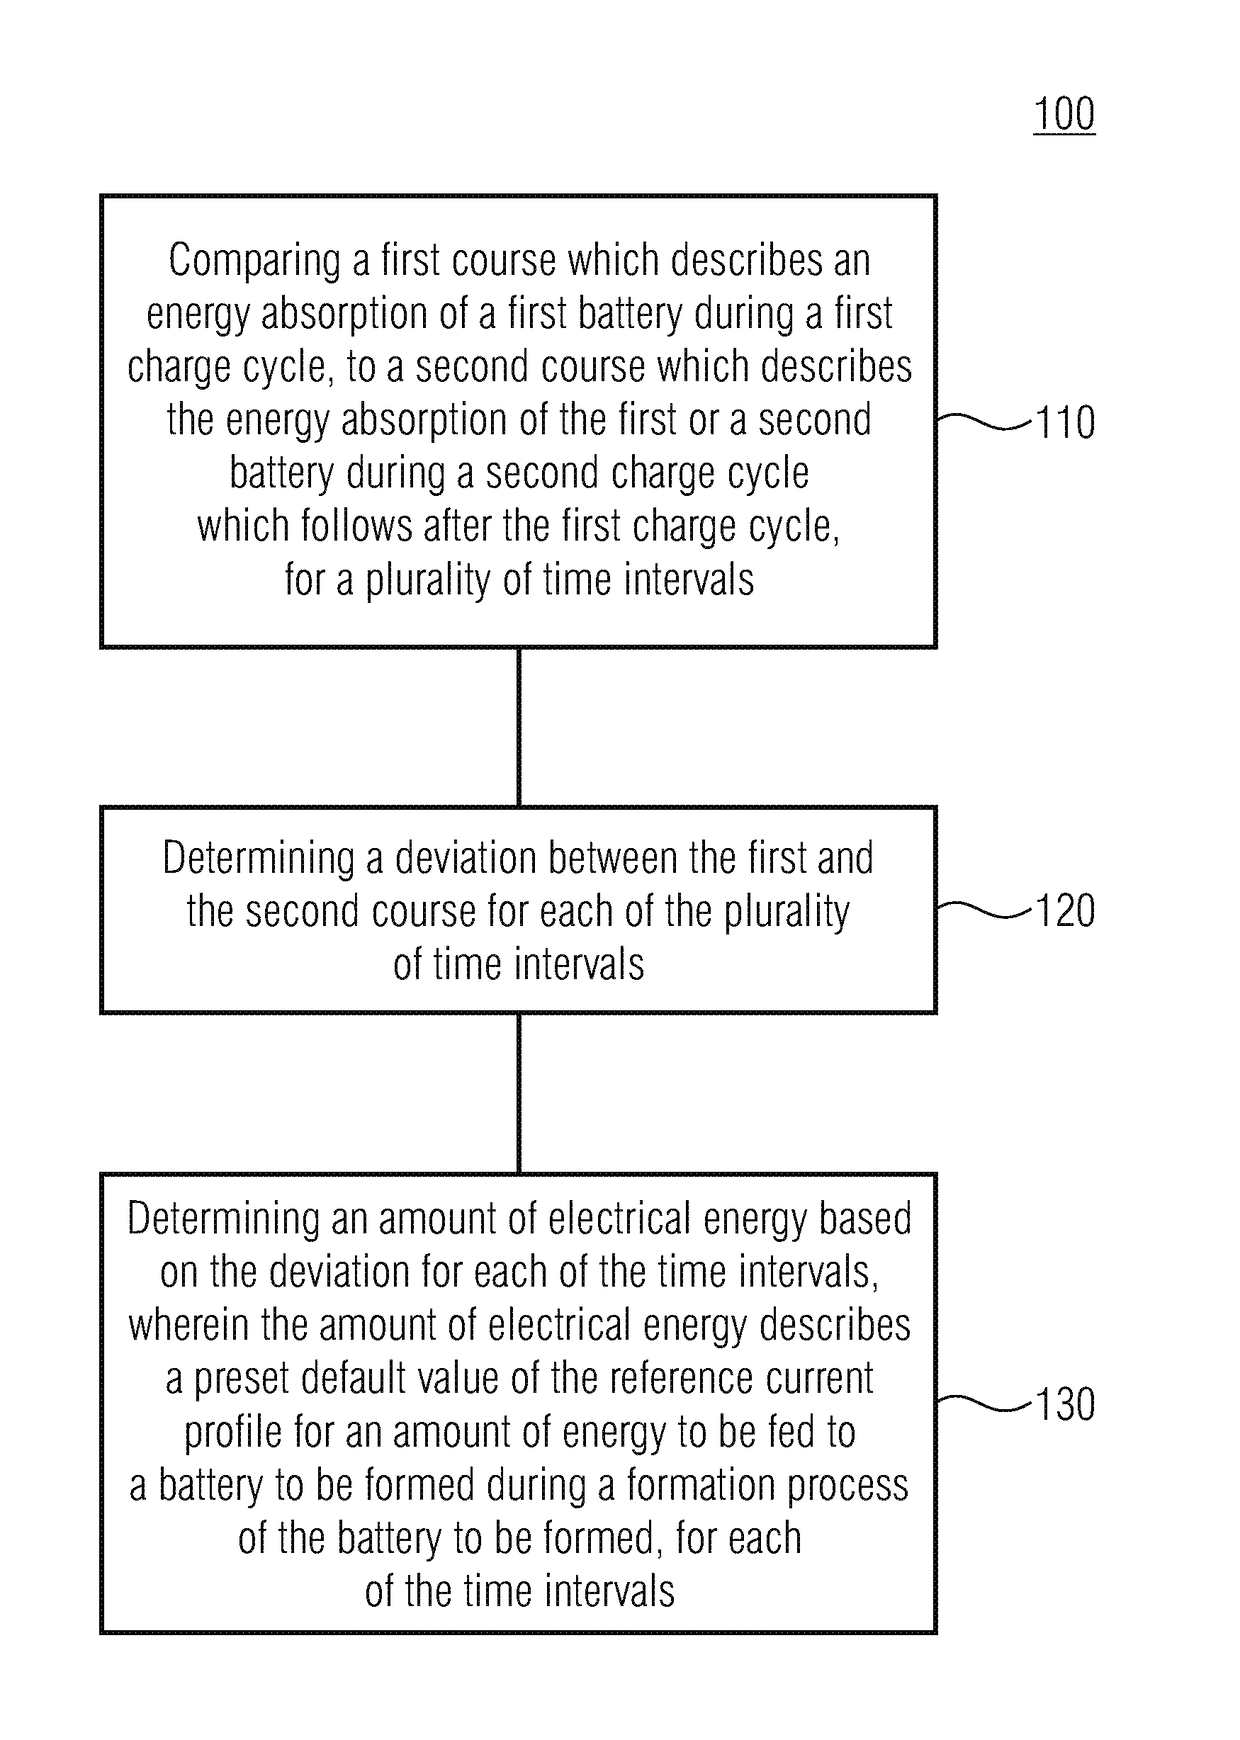 Method for determining a reference energy profile and device for forming a battery